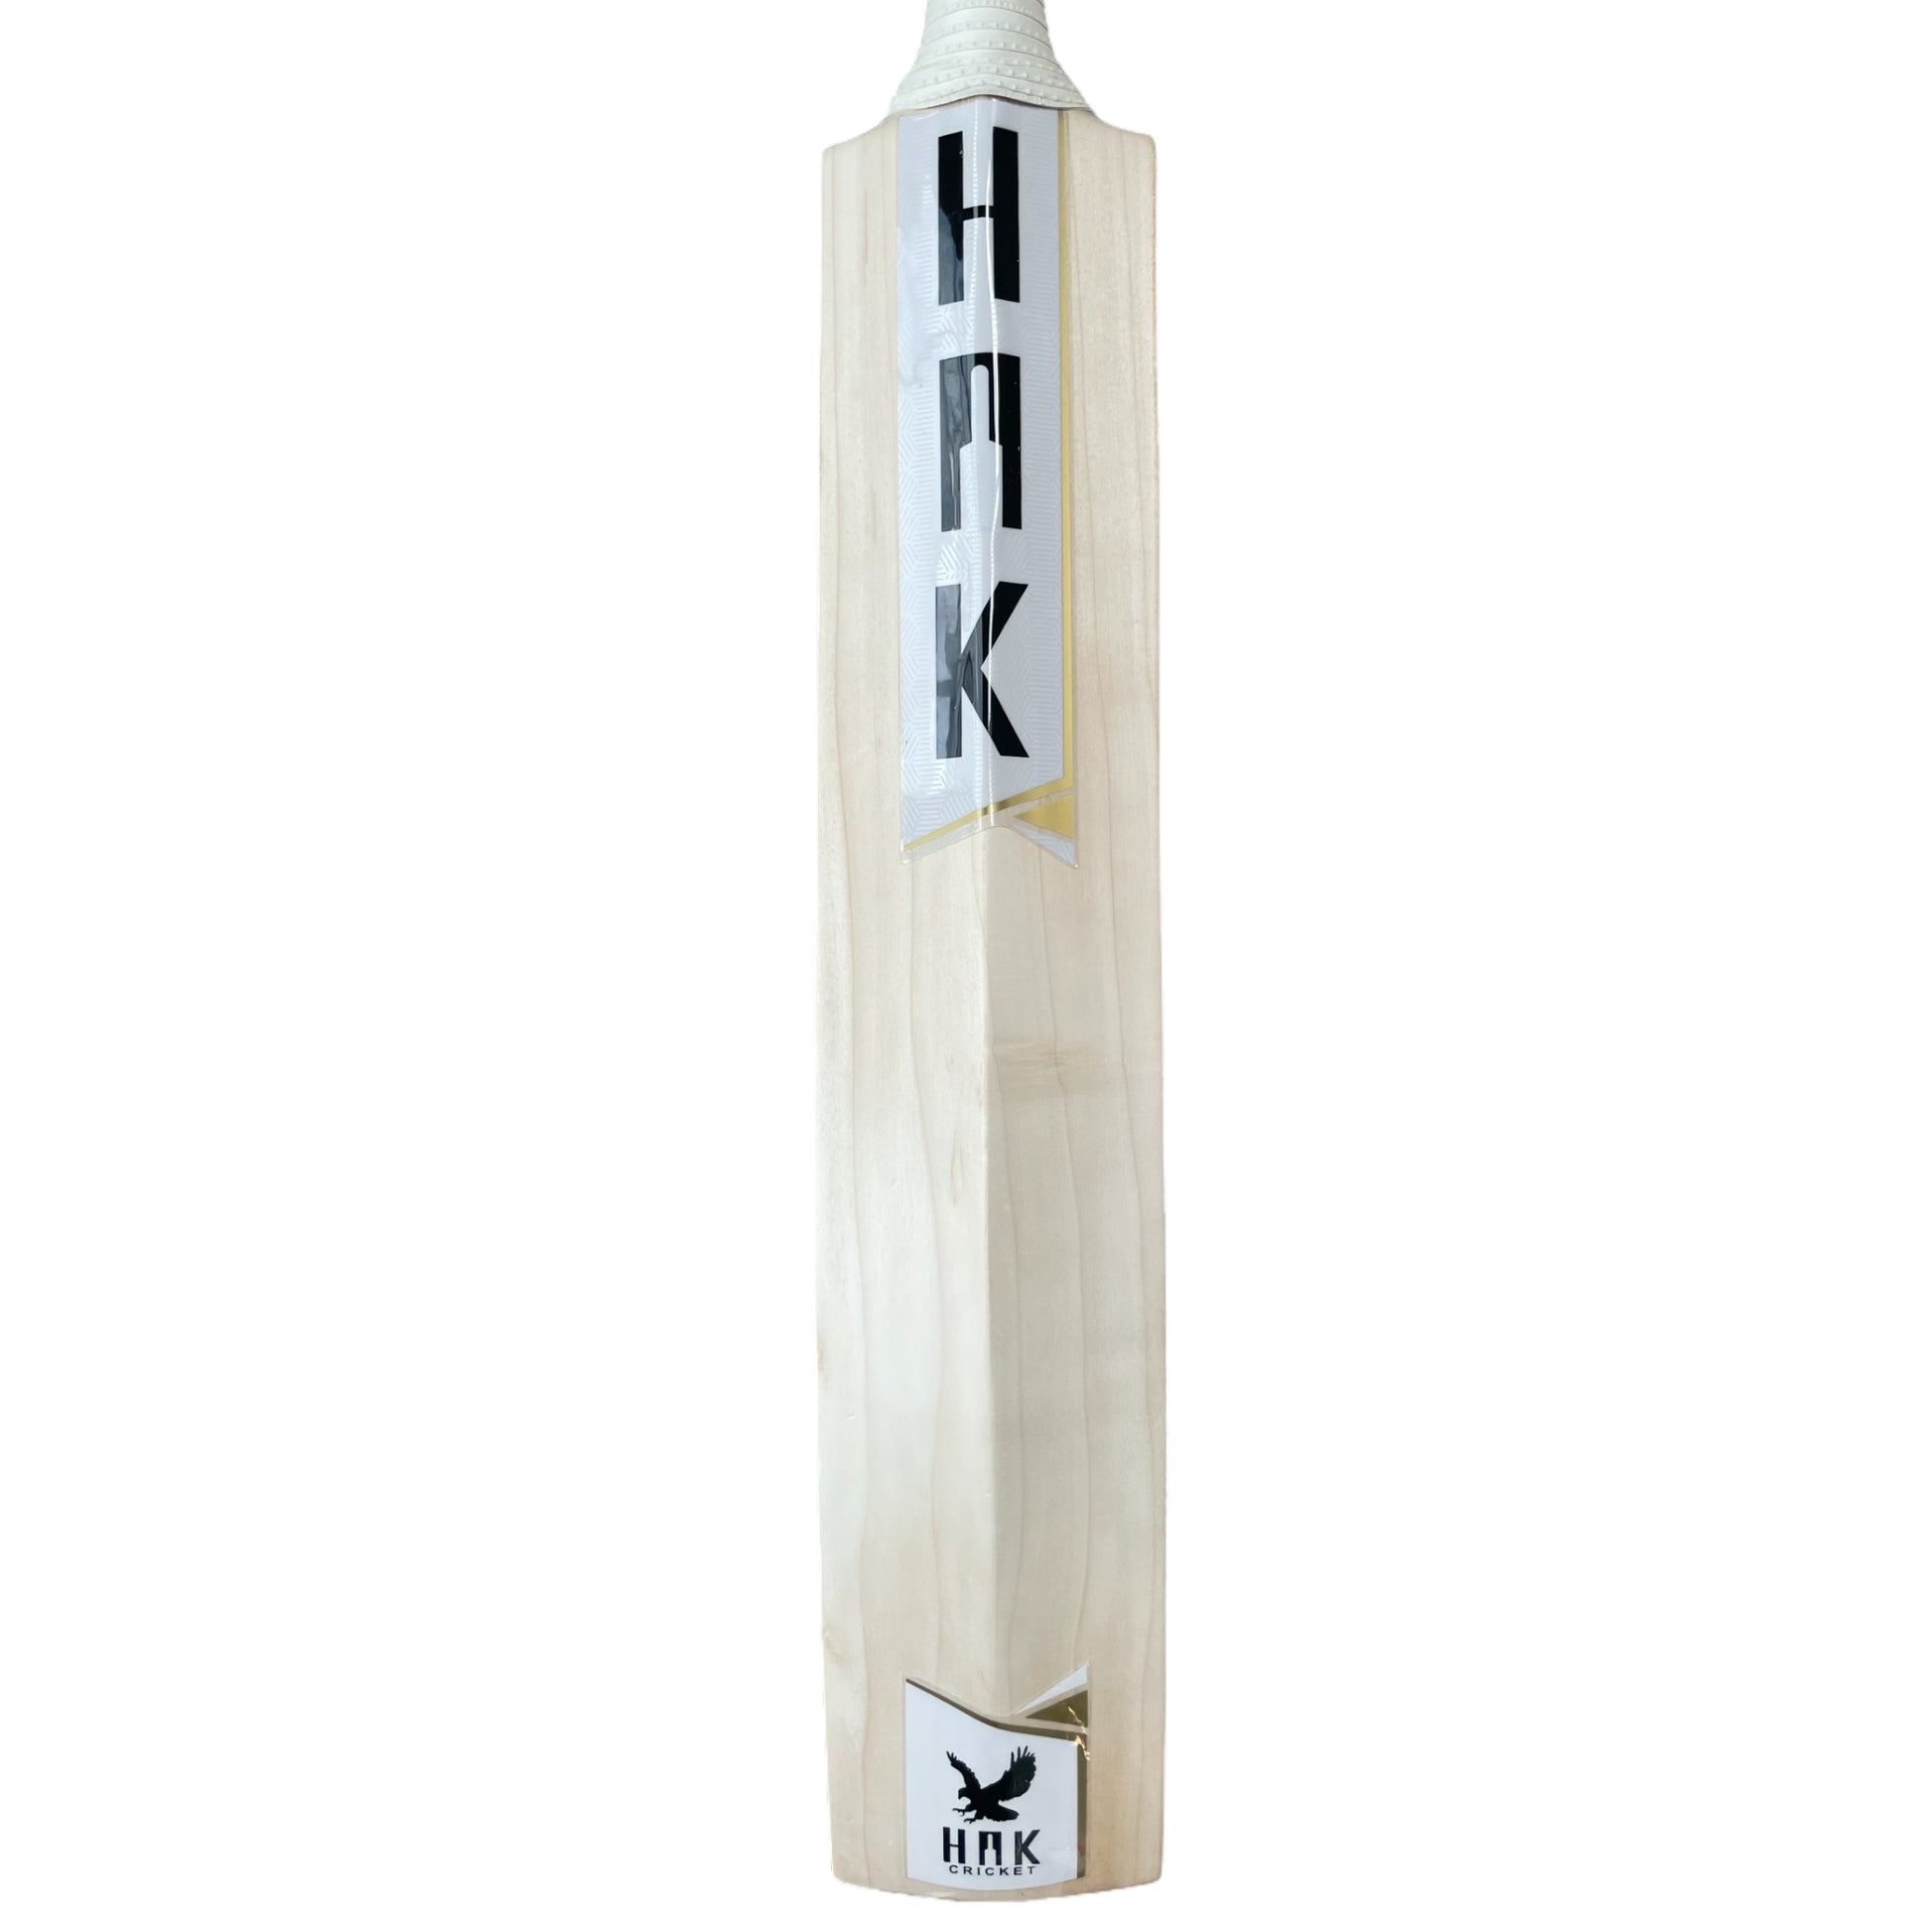 HAK Cricket English Willow cricket bat Grade 1 Handmade cricket bats handcrafted online store shop by appointment only sussex surrey london essex kent hampshire oxford york crawley burgess hill brighton and hove